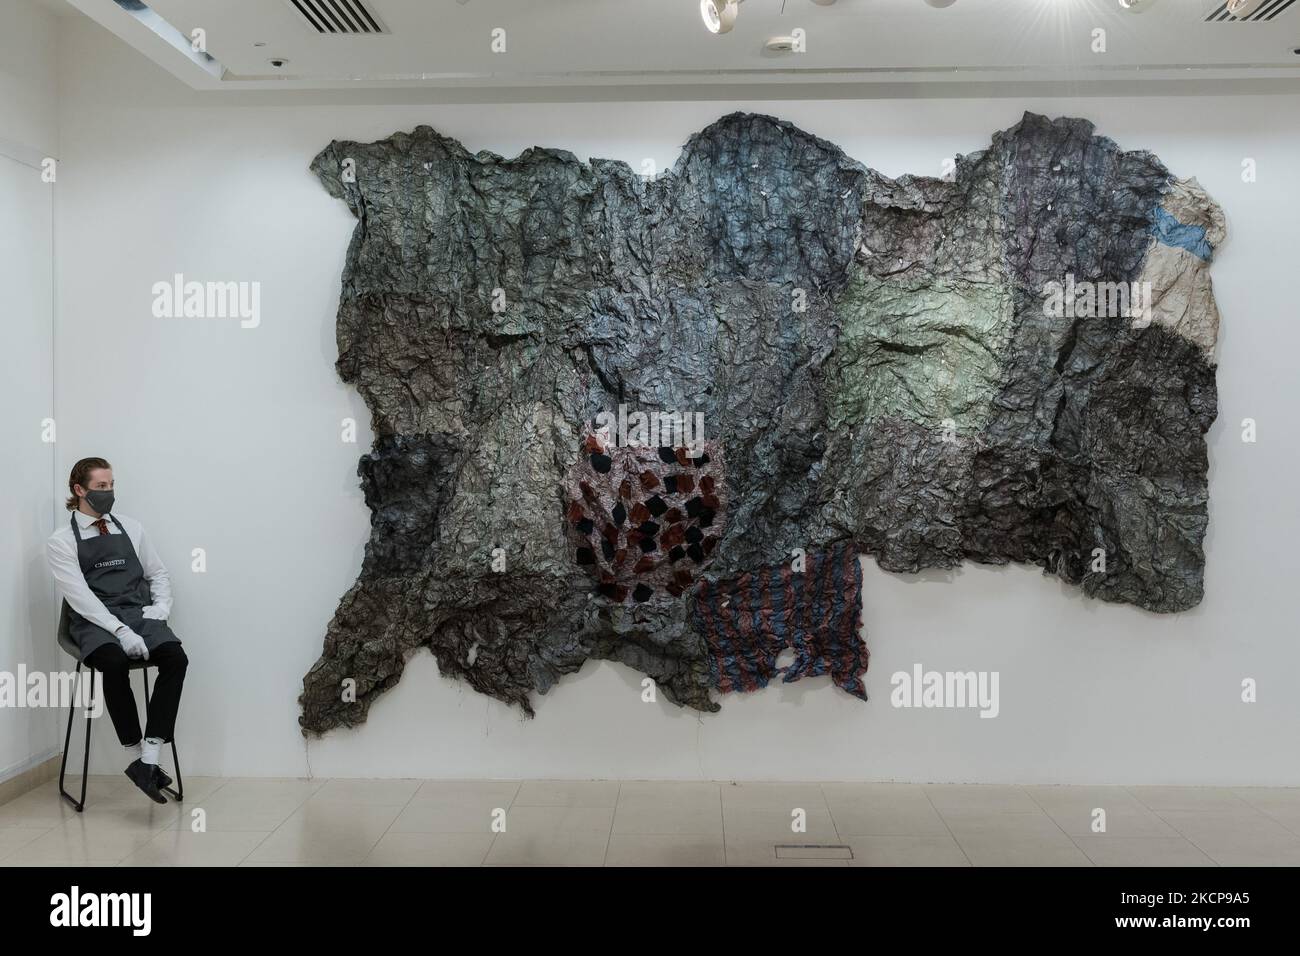 LONDON, UNITED KINGDOM - OCTOBER 08, 2021: A staff member looks at an artwork by Elolo Bosaka (b. 1991) 'Pourquoi les lunettes sont noires?', 2020, part of REDEFINING THE TREND – Histories in the Making curated exhibition, during a press preview of 20th/21st Century: Evening Sale at Christie's auction house on October 08, 2021 in London, England. (Photo by WIktor Szymanowicz/NurPhoto) Stock Photo